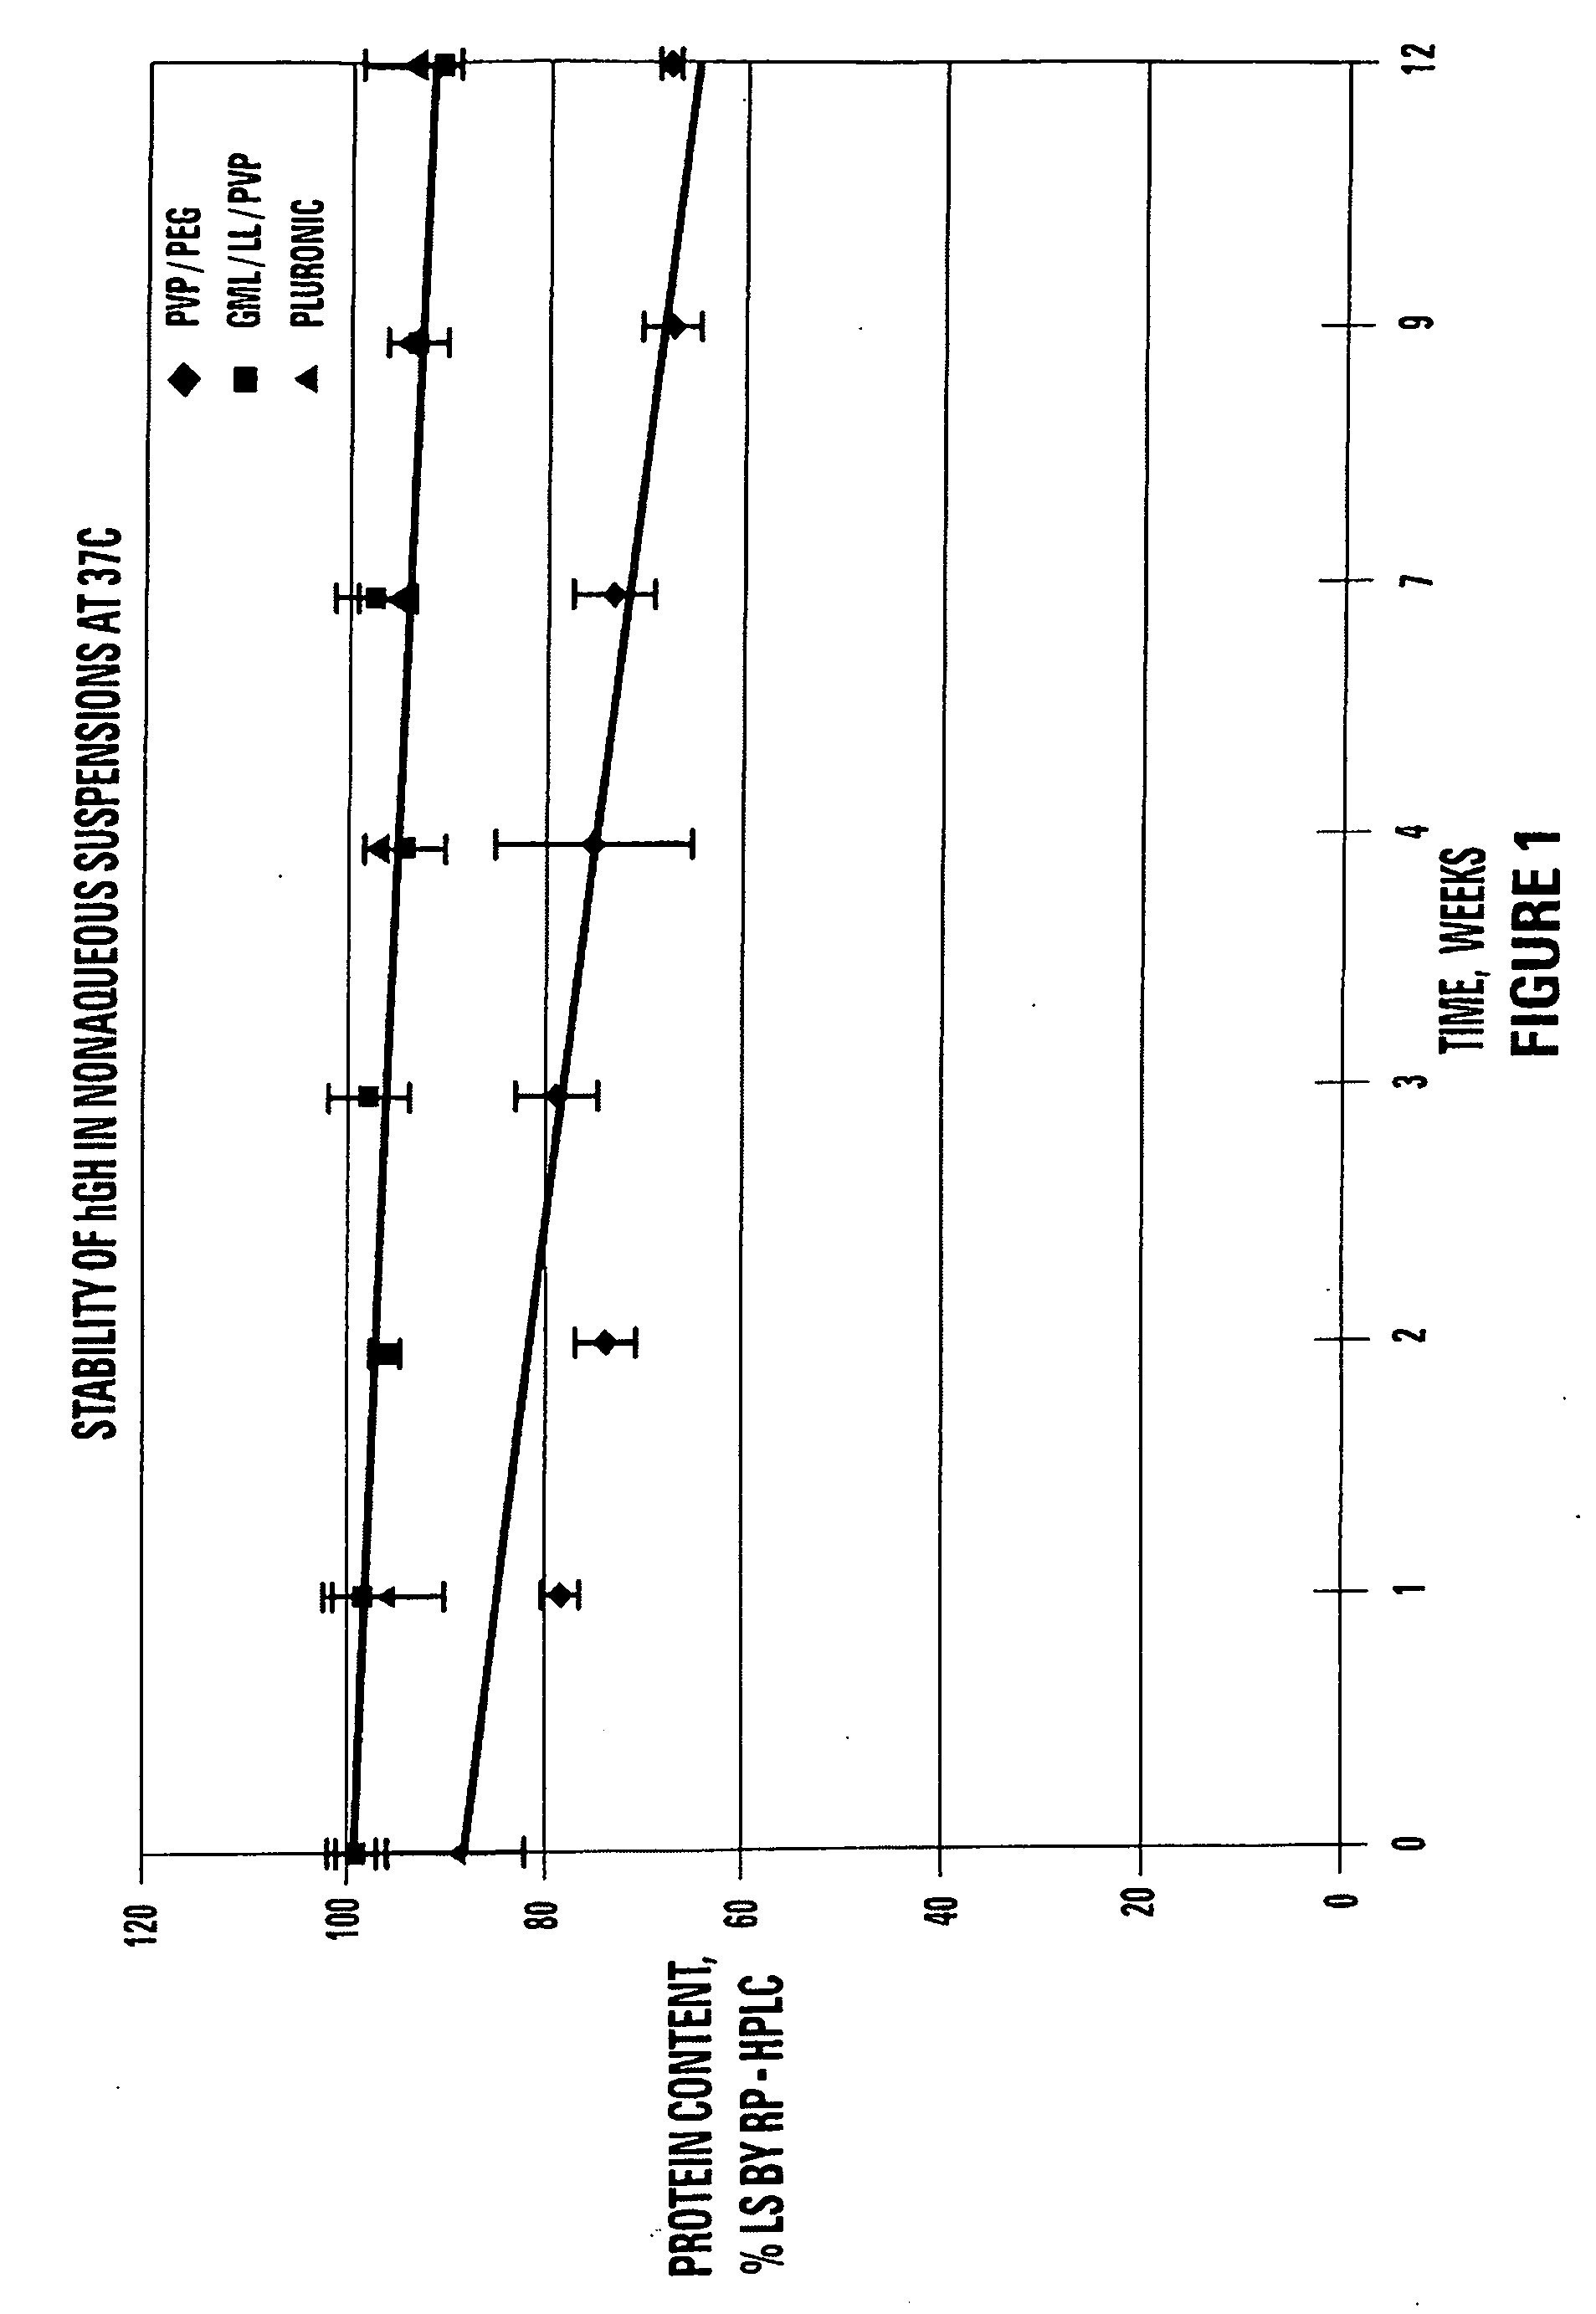 Stable non-aqueous single phase viscous vehicles and formulations utilizing such vehicles